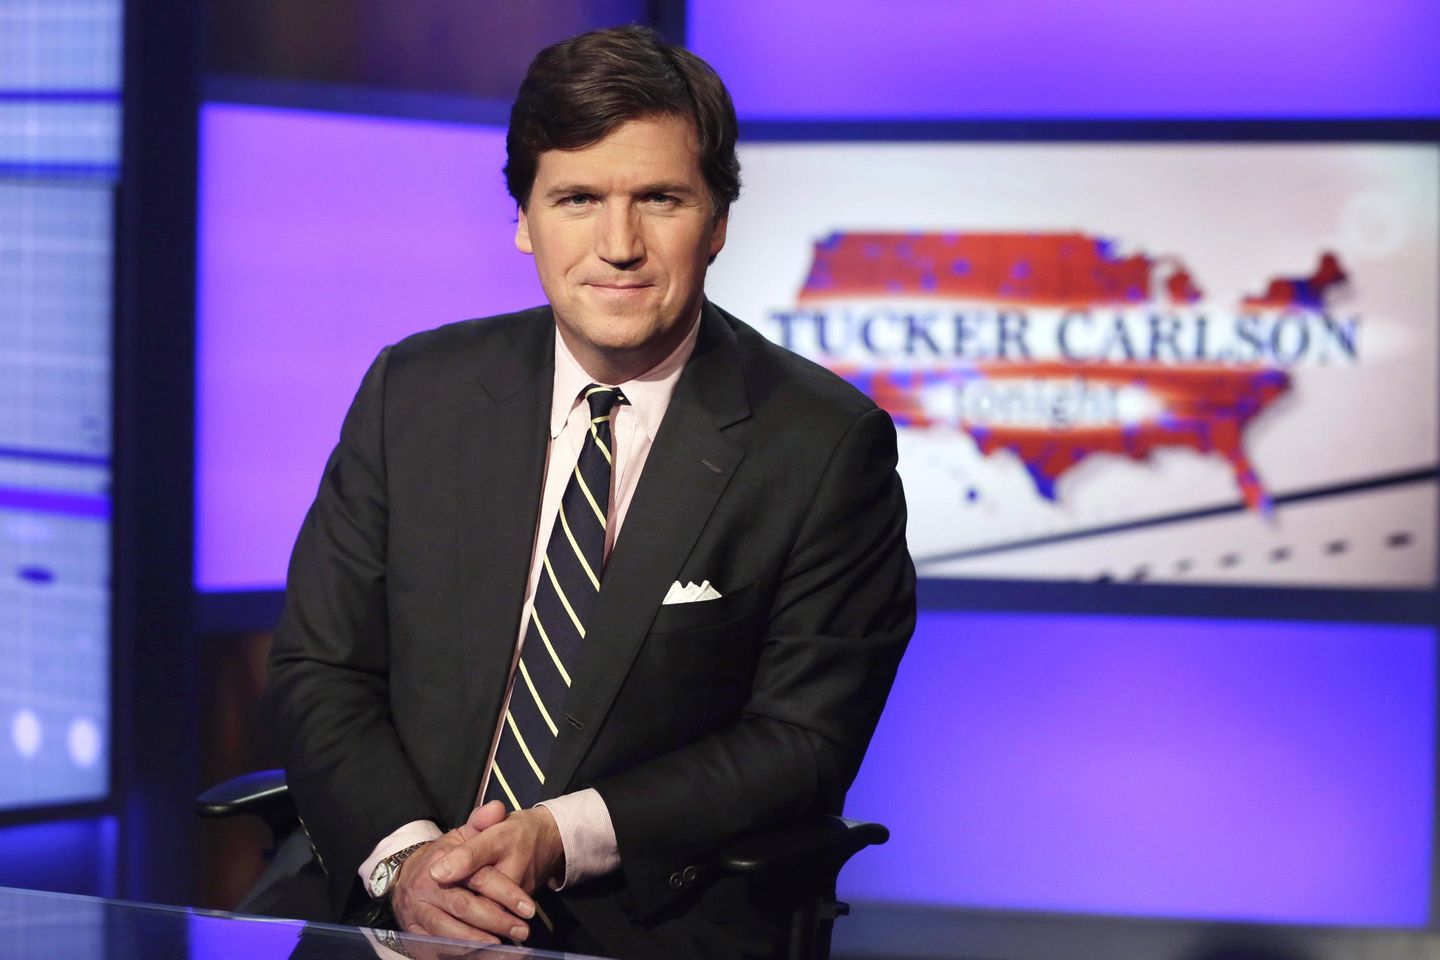 Fox News Tonight loses over 700,000 viewers after Tucker Carlsons exit